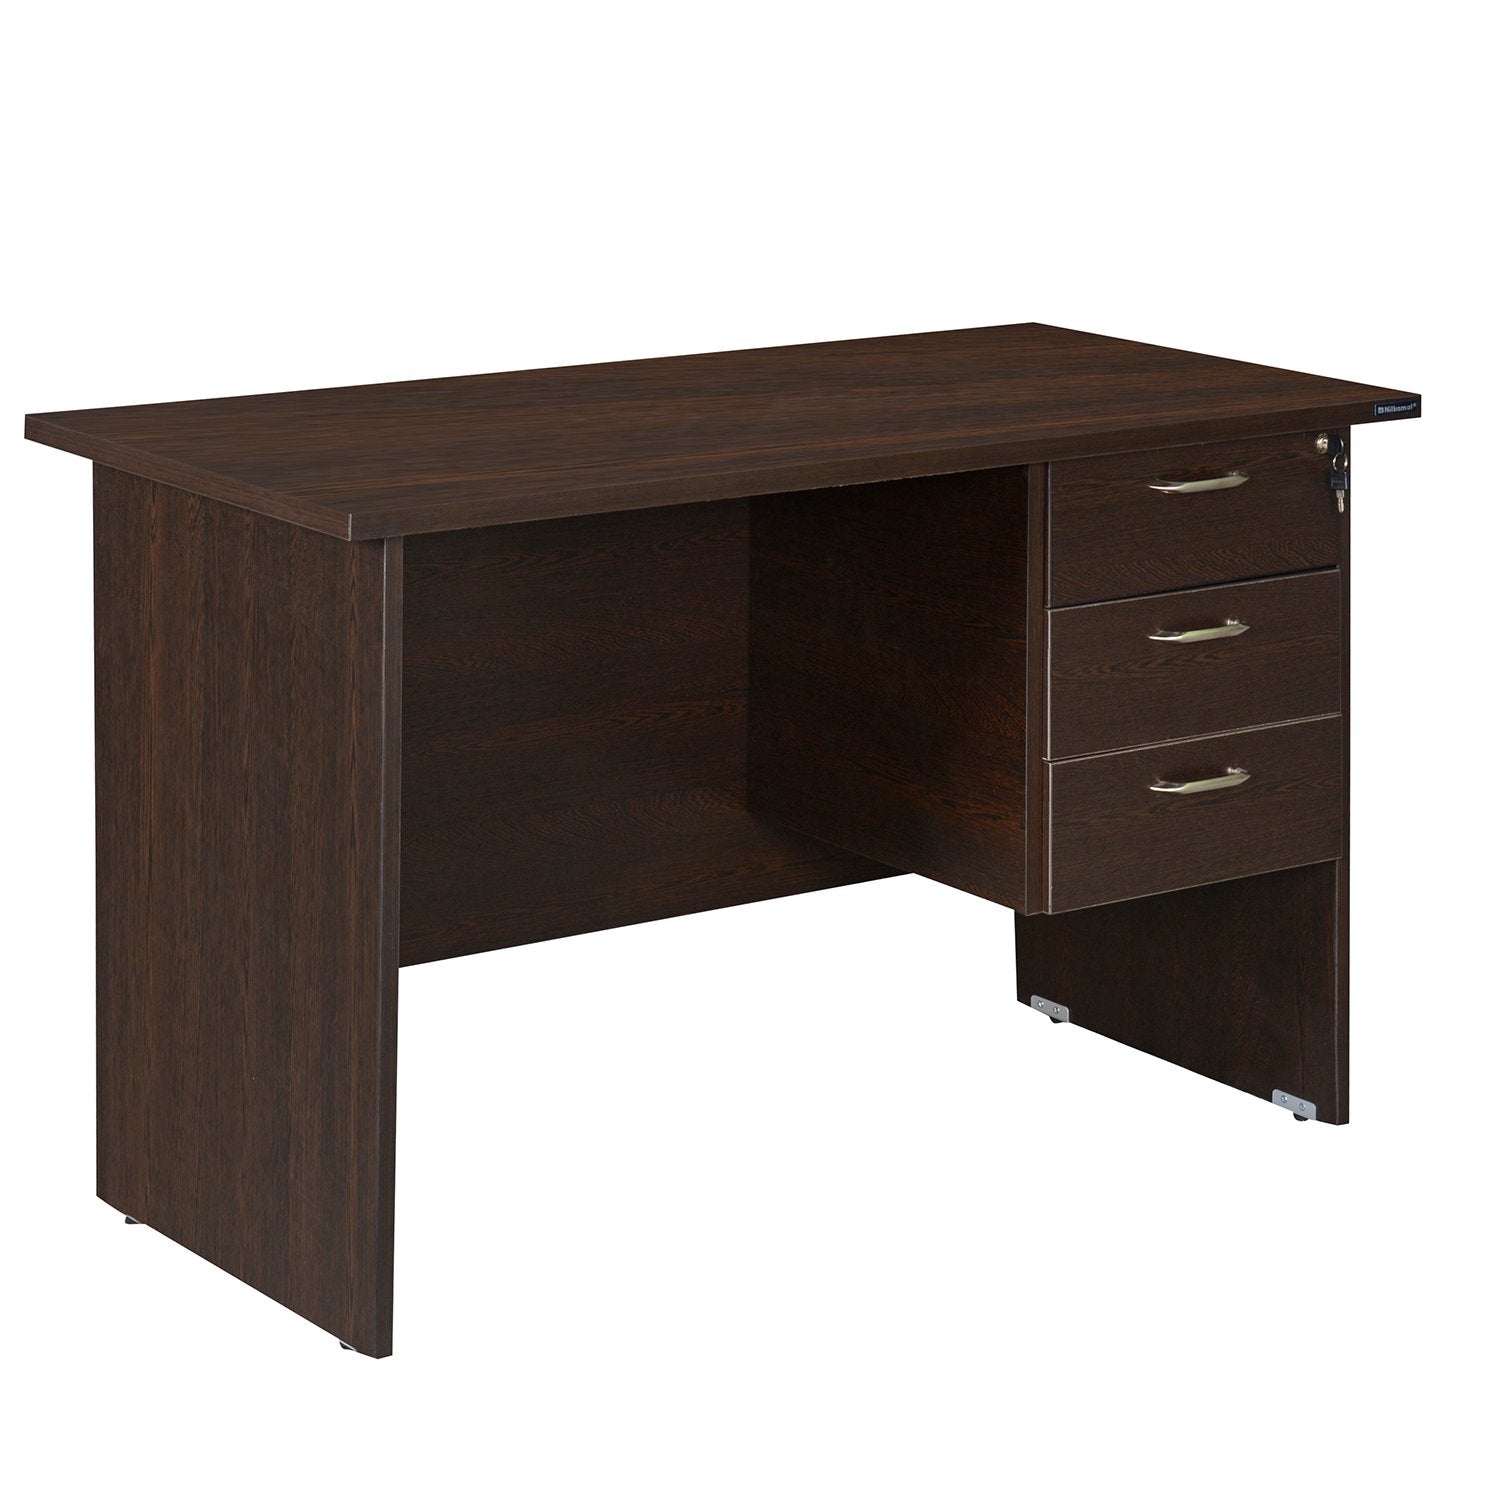 4 feet Office Table with 3 Drawers-Wenge Home Office Garden | HOG-HomeOfficeGarden | HOG-Home.Office.Garden